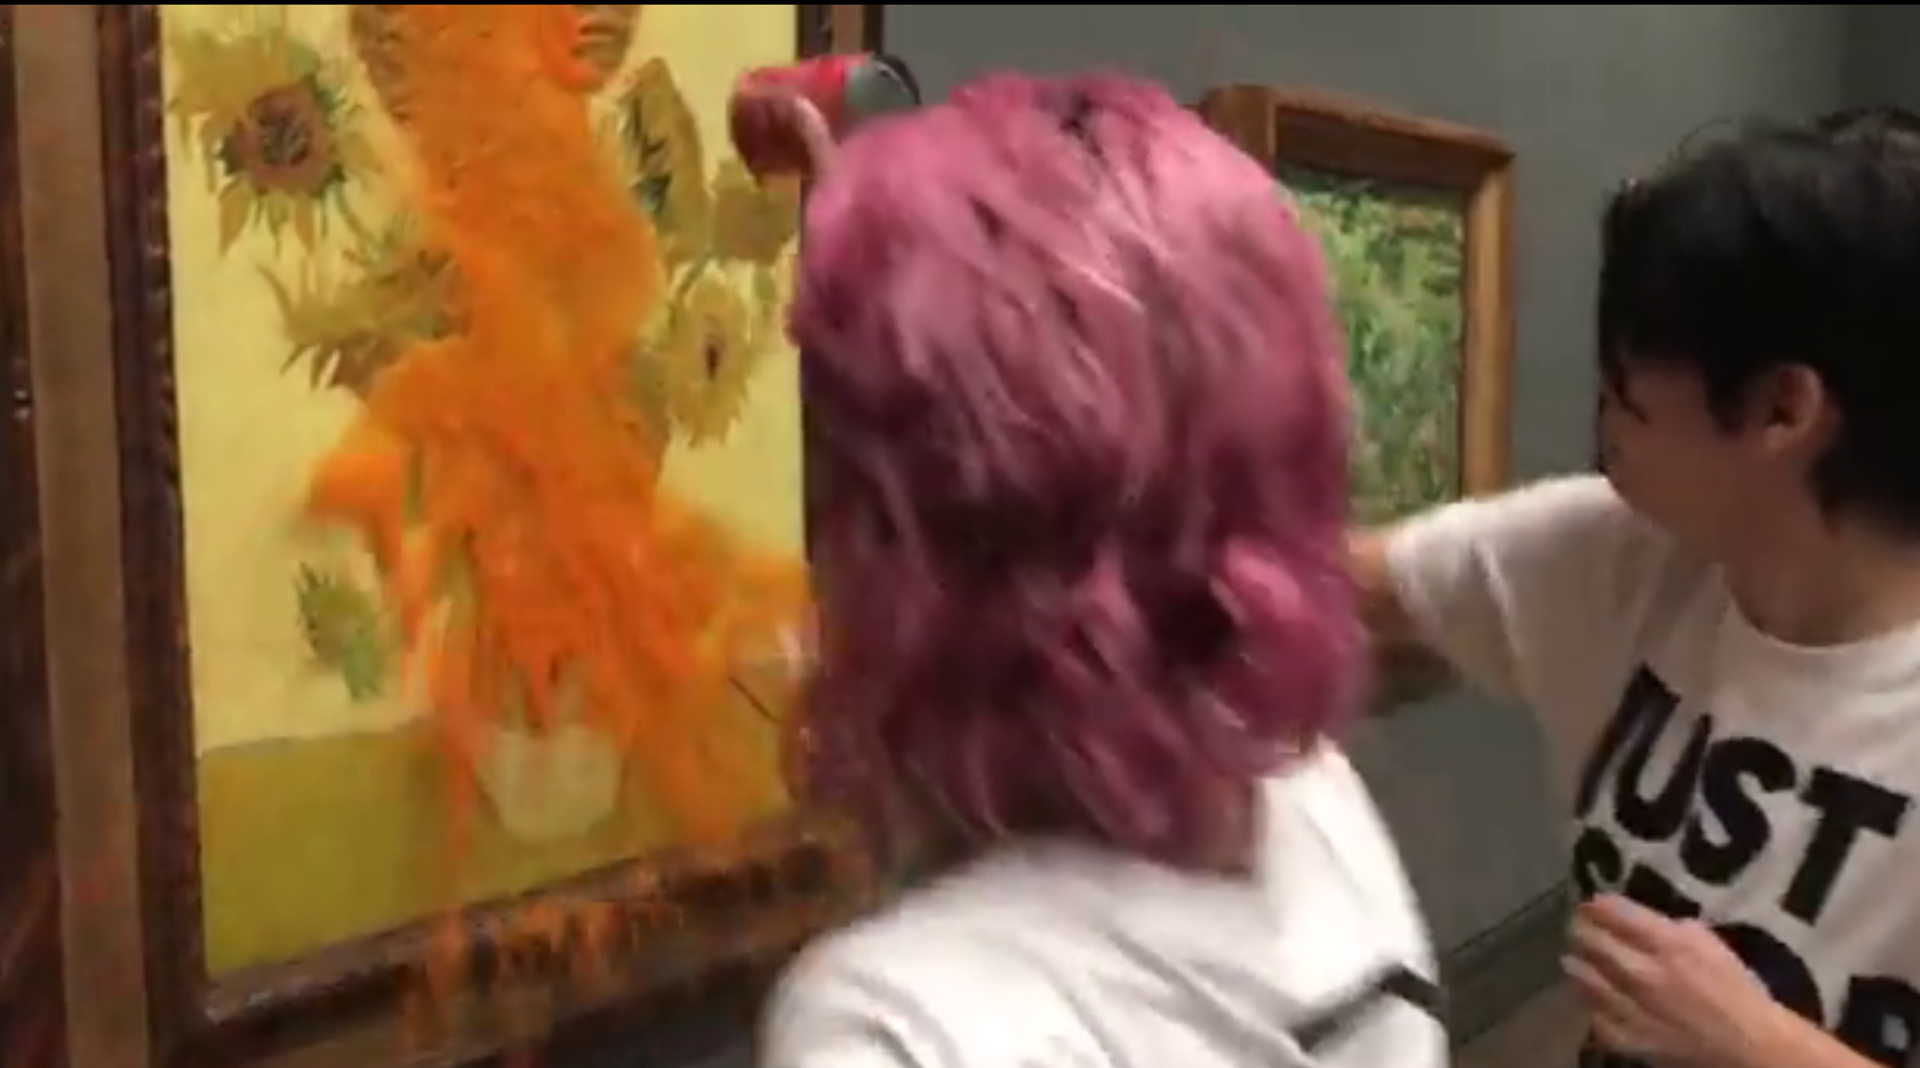 Eco-activists from the Just Stop Oil movement vandalized Van Gogh's Sunflowers painting at the National Gallery in London on October 14, 2022. - Sputnik International, 1920, 08.11.2022